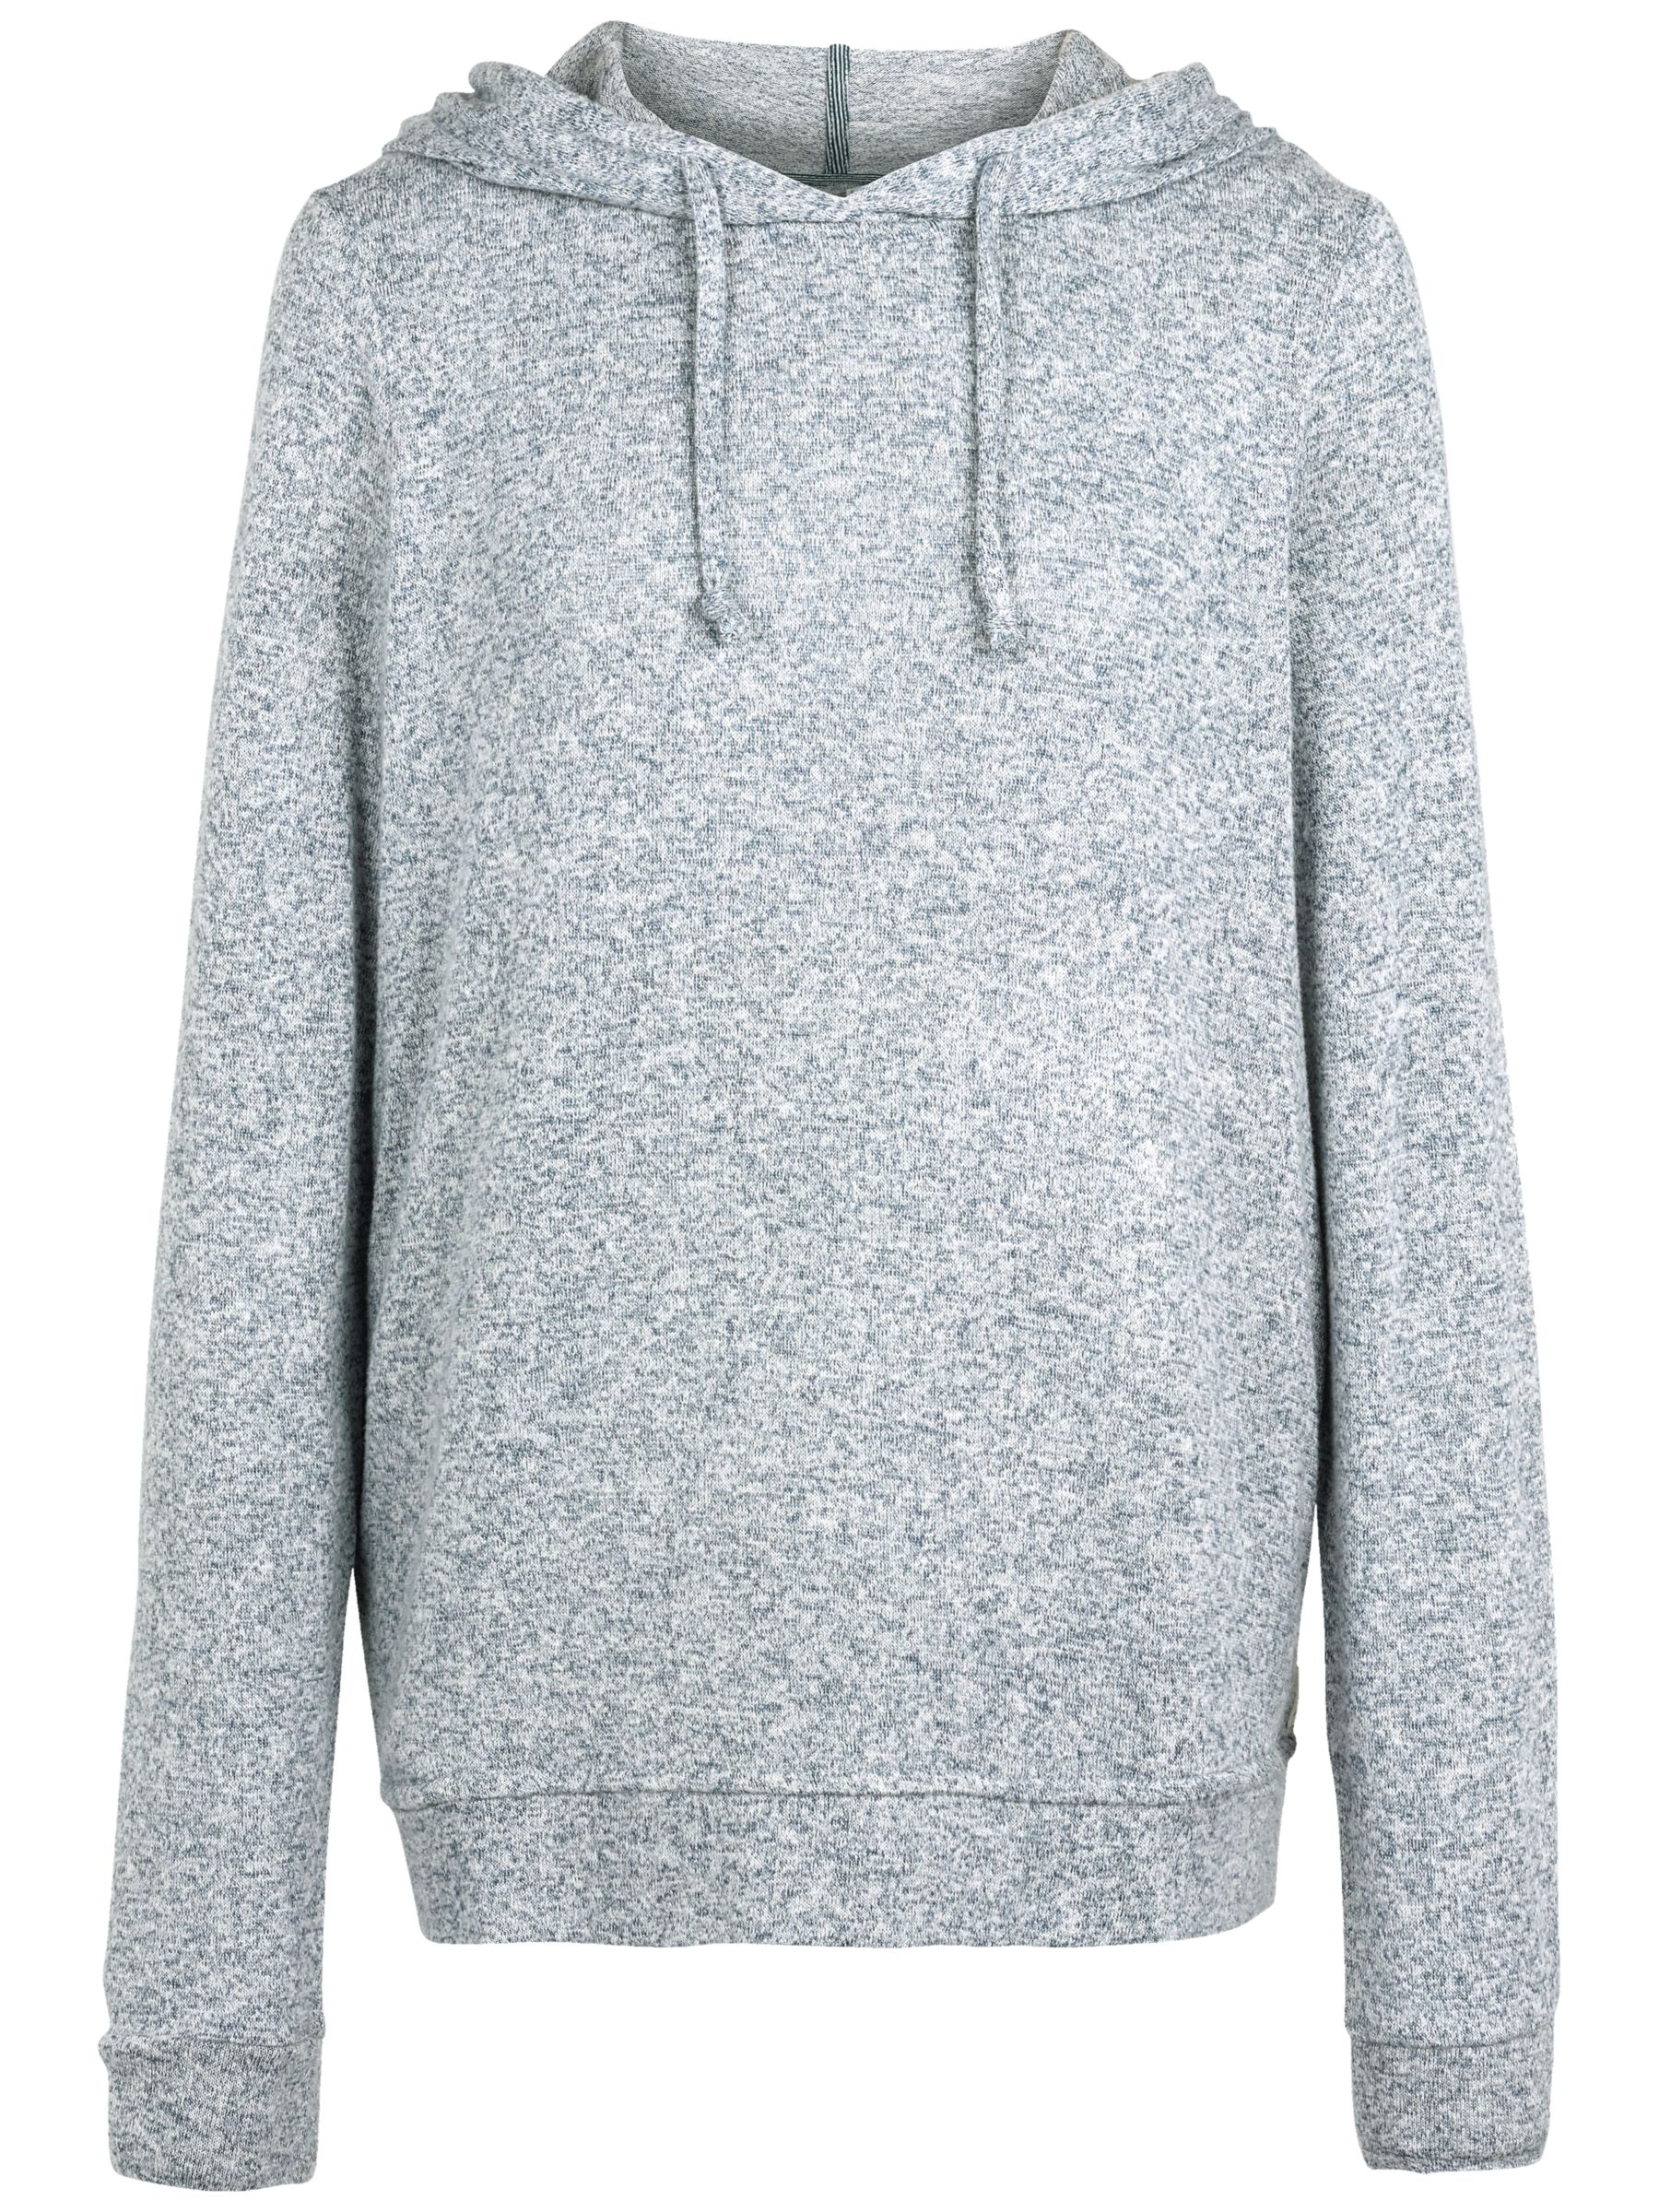 Fat Face Weston Soft Lounge Hoodie Reviews